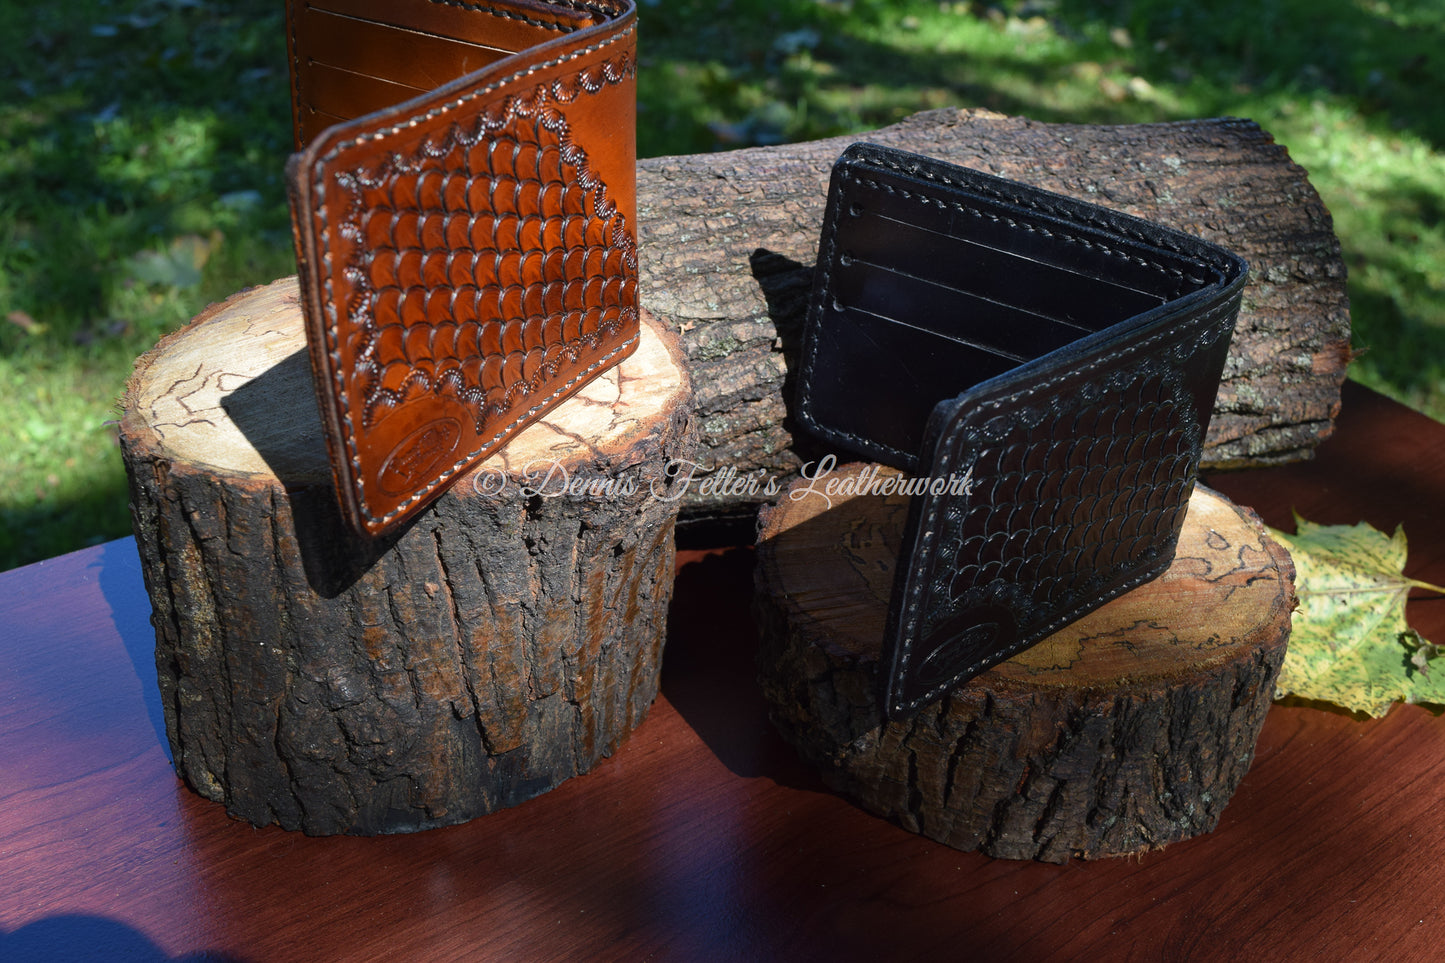 view of both black and brown leather wallets showing the exterior cover more